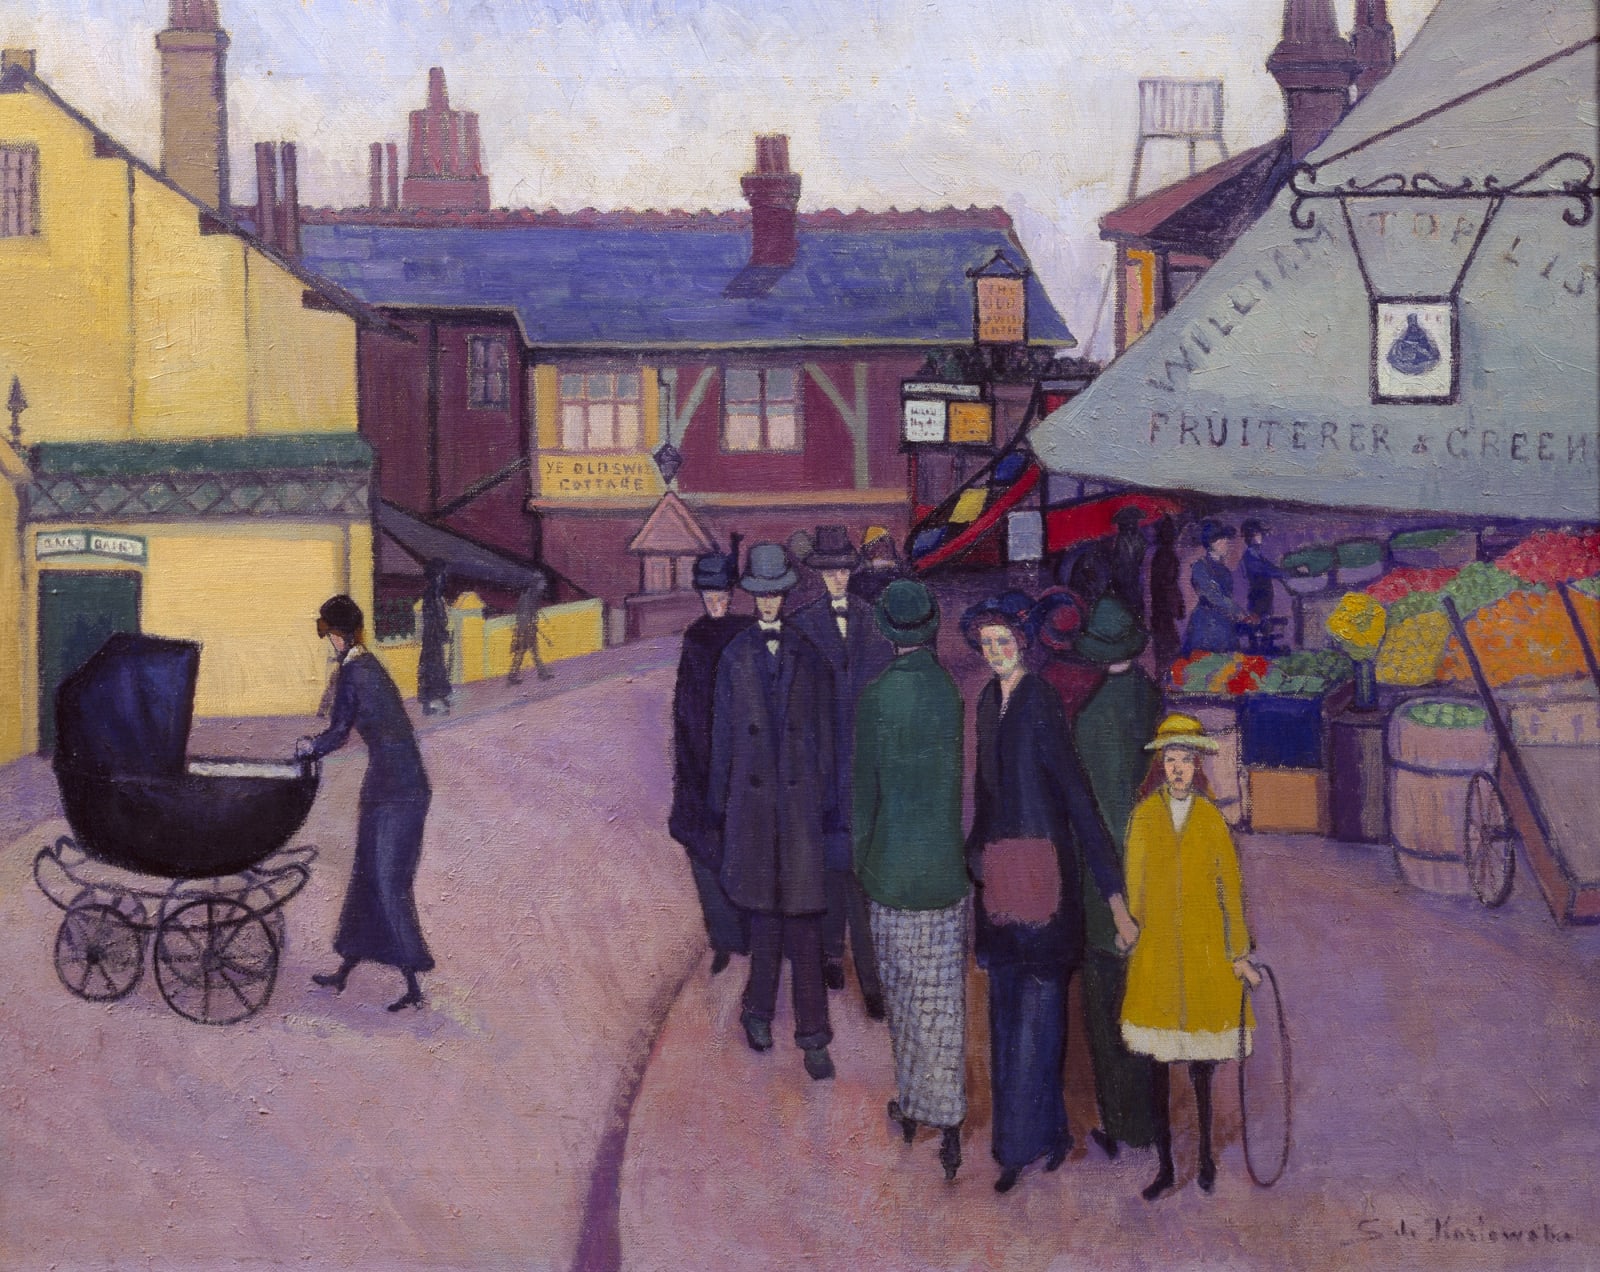 Stanislawa de Karlowska (1876-1952) Swiss Cottage 1914 Oil on canvas 61 × 76.2 cm Tate: Presented by the artist's family 1954 © Tate, London 2013 To see and discover more about this artist click here